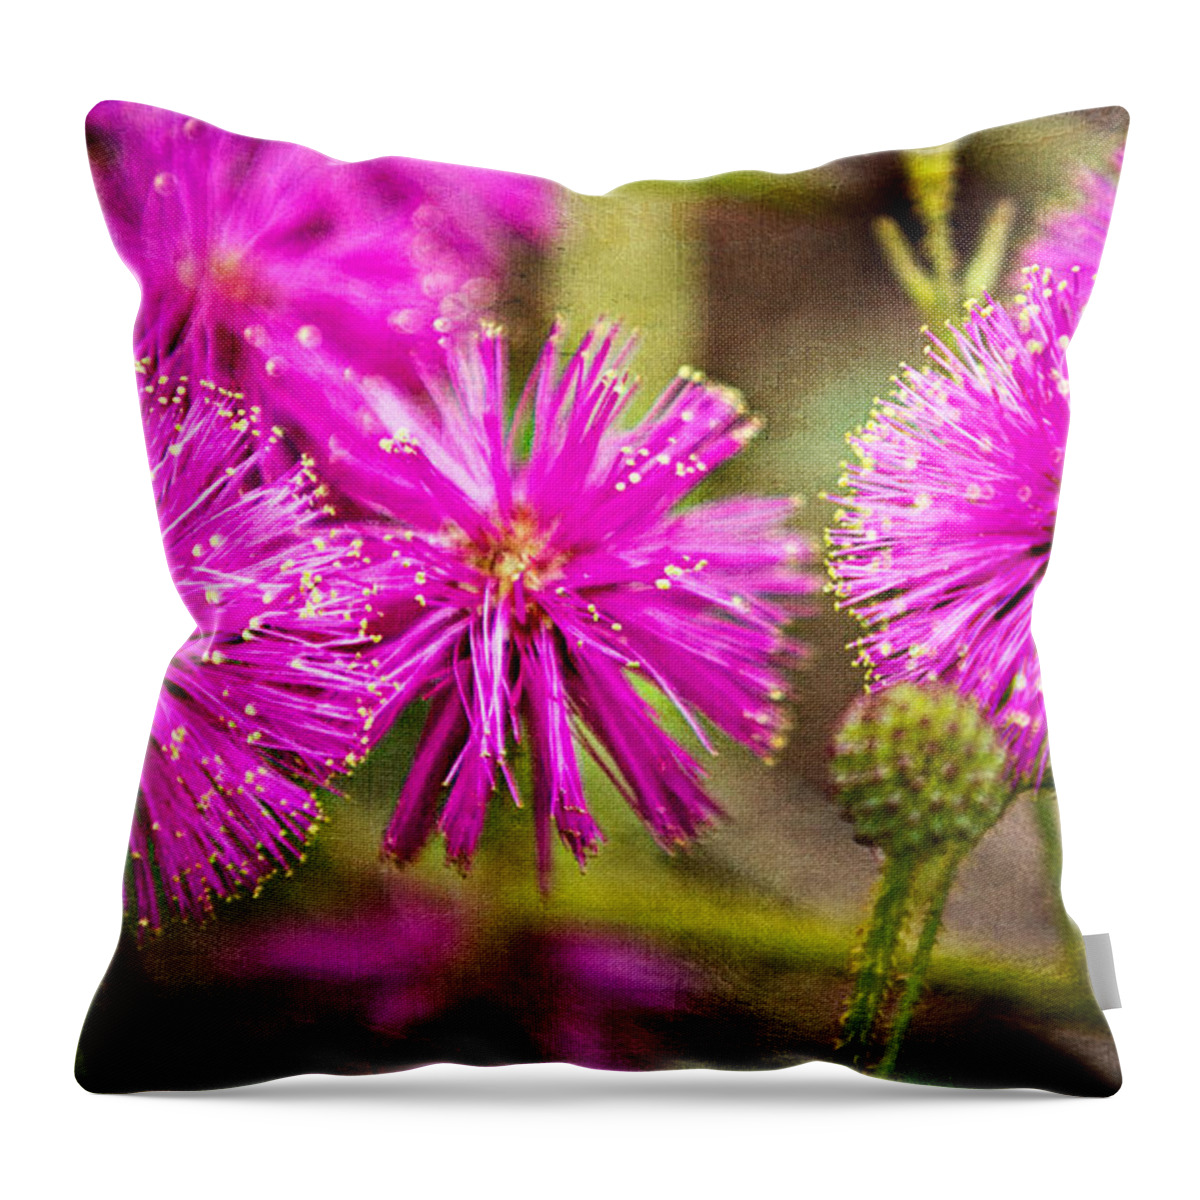 Asteraceae Throw Pillow featuring the photograph Sensitive Briar by Lana Trussell